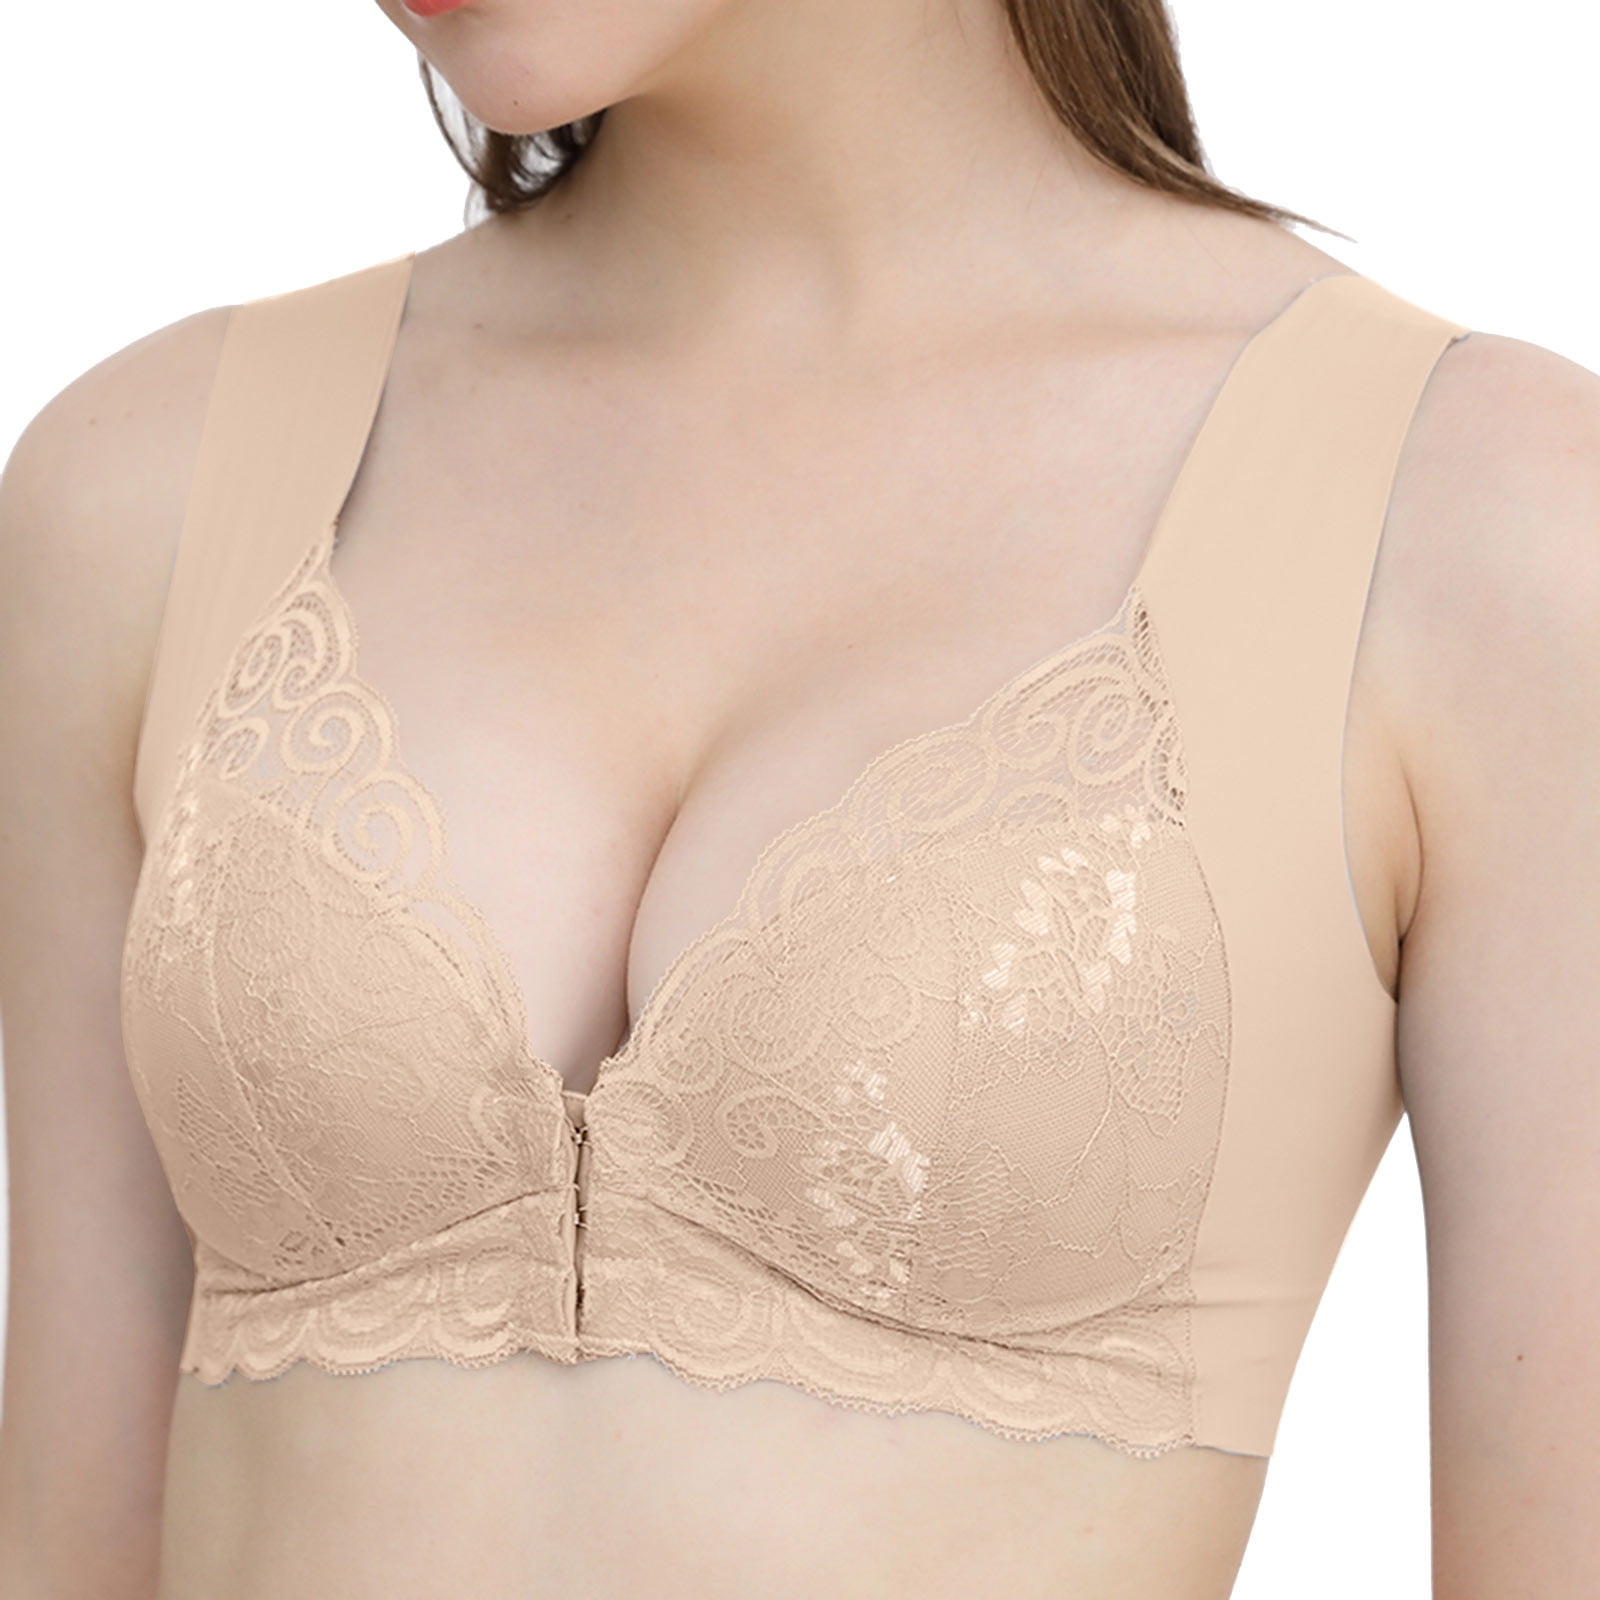 Bras for Women Full Coverage Full Coverage Push-Up Bralettes Lace